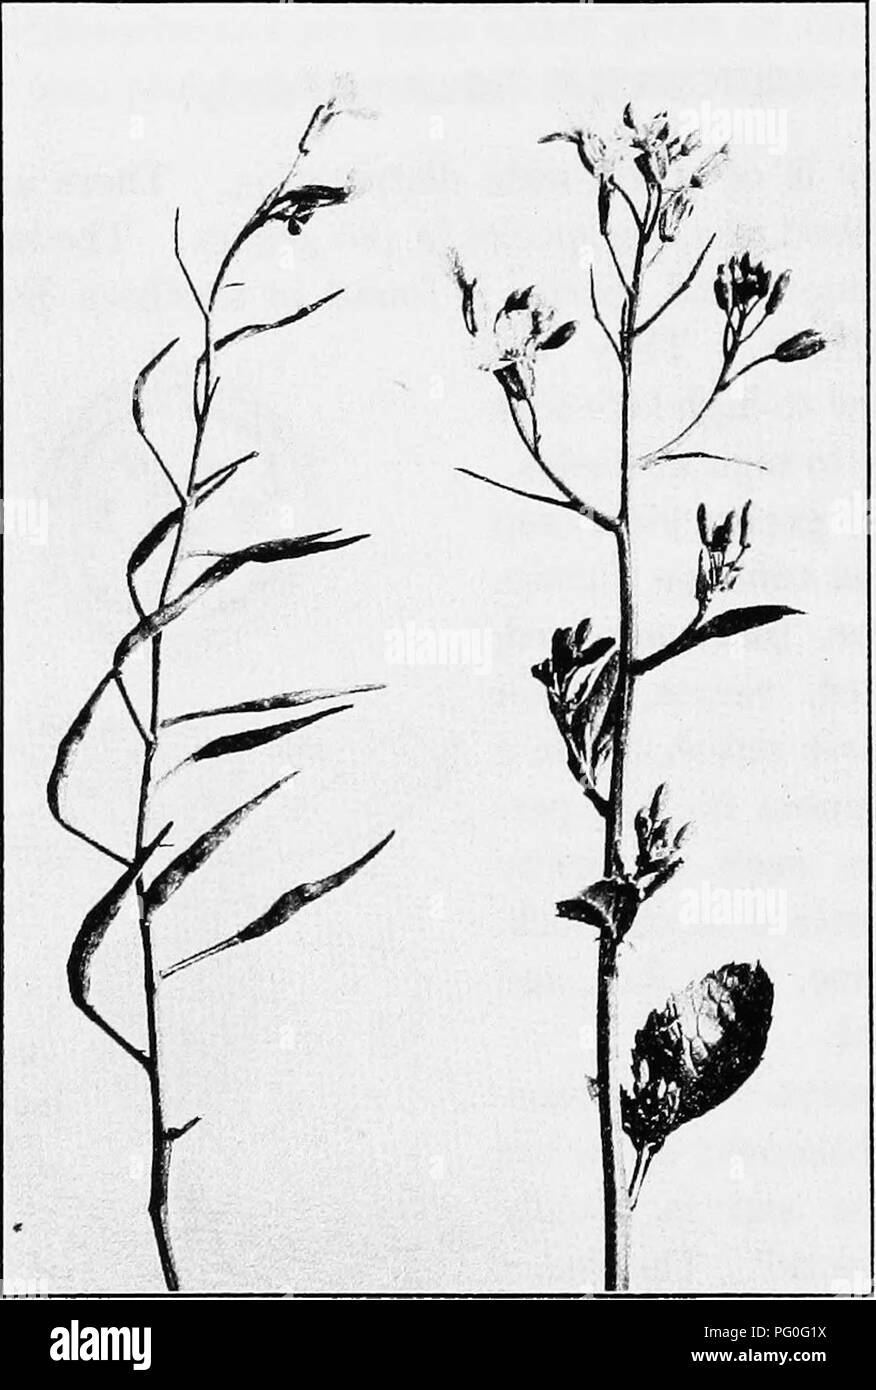 . The botany of crop plants : a text and reference book. Botany, Economic. 324 BOTANY OF CROP PLANTS acteristic (Fig. 131). It is perfect and regular with four sepals, four petals, six stamens (two short and four long), and a two-celled ovary. The four sepals are entirely dis-. FlG. 132.—Common garden radish (Raphanus sativus). In flower, on right- and in fruit, on left. Note the characteristic racemose inflorescence with flowers at the apex and fruit at the base. tinct, but often overlapping; the two outer are narrow, and the two inner may be narrow also, but often are distinguished from the  Stock Photo